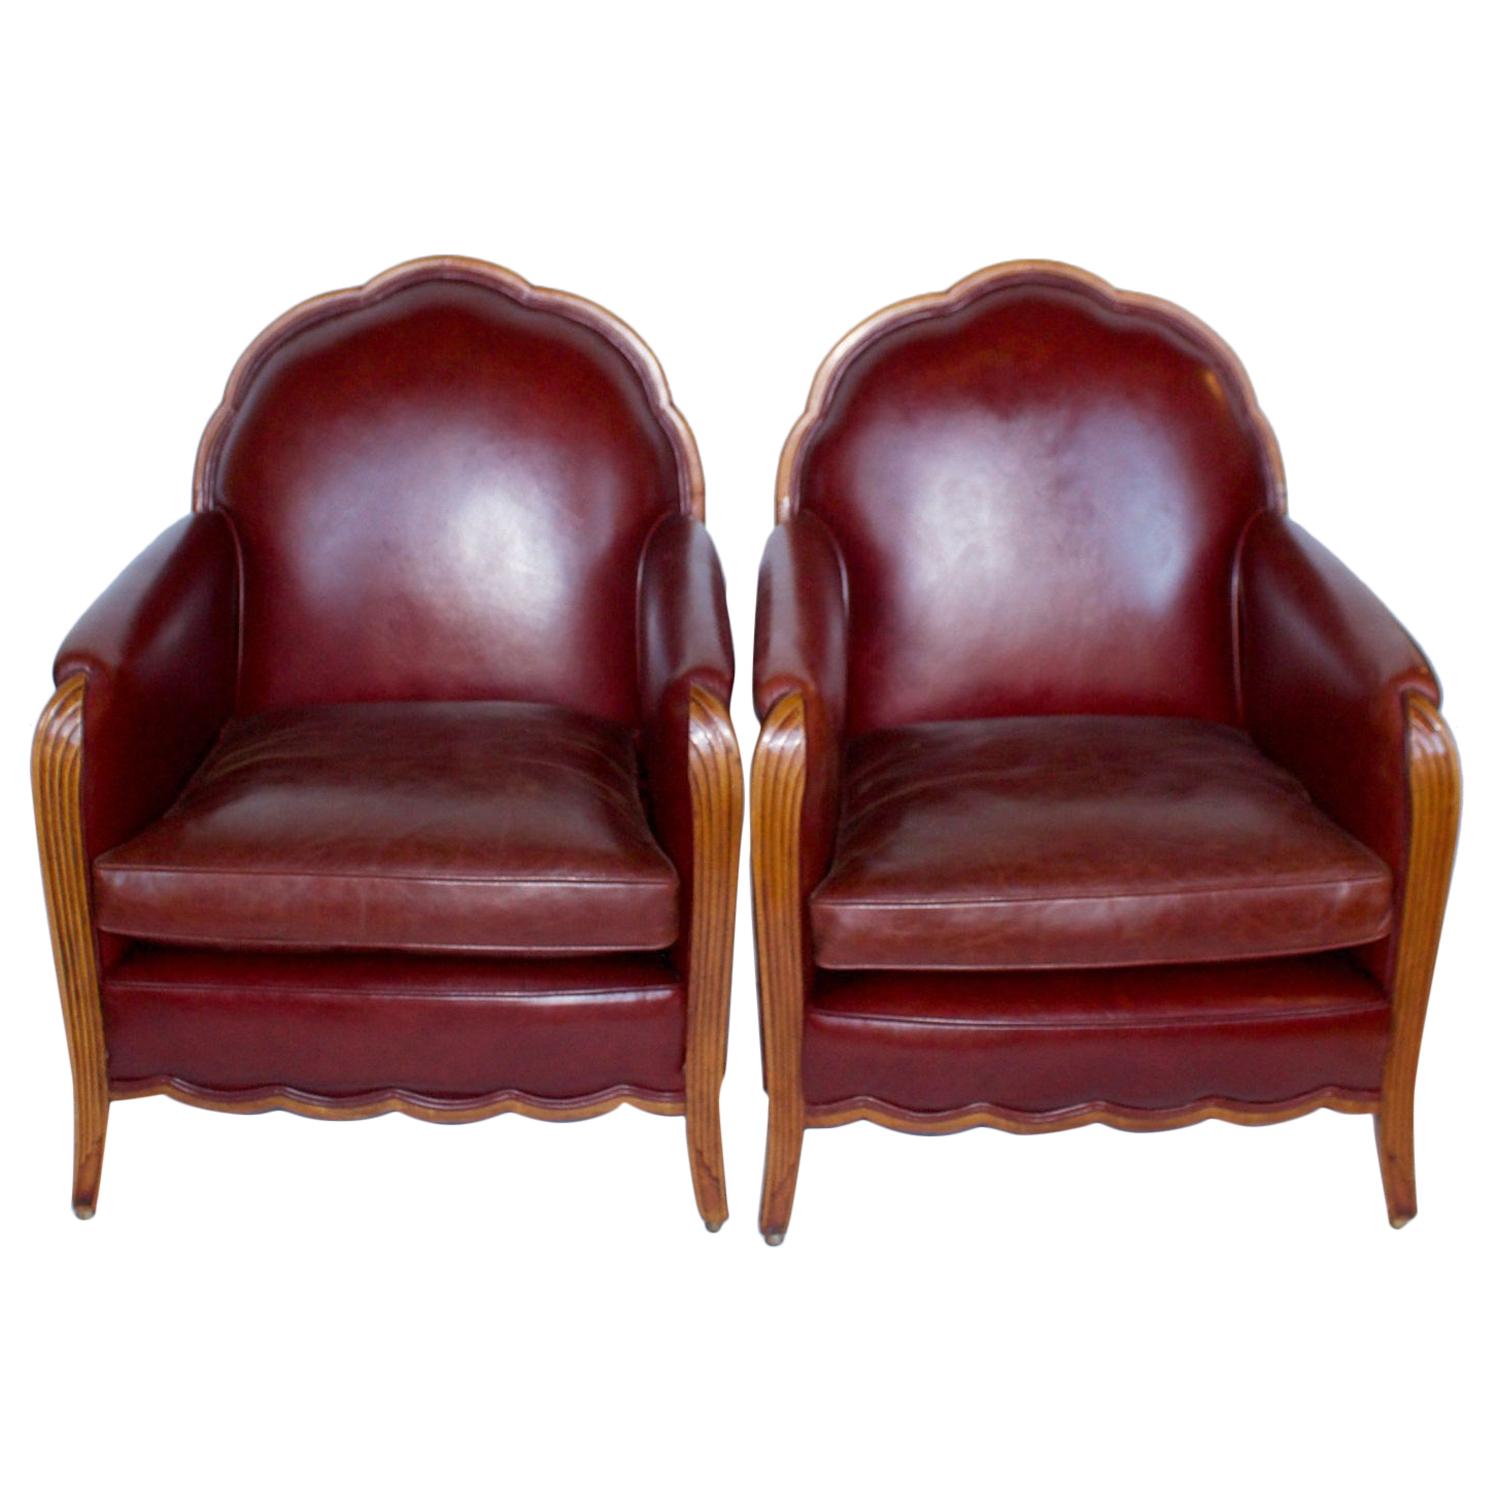 Pair of Art Deco Armchairs, French, circa 1925